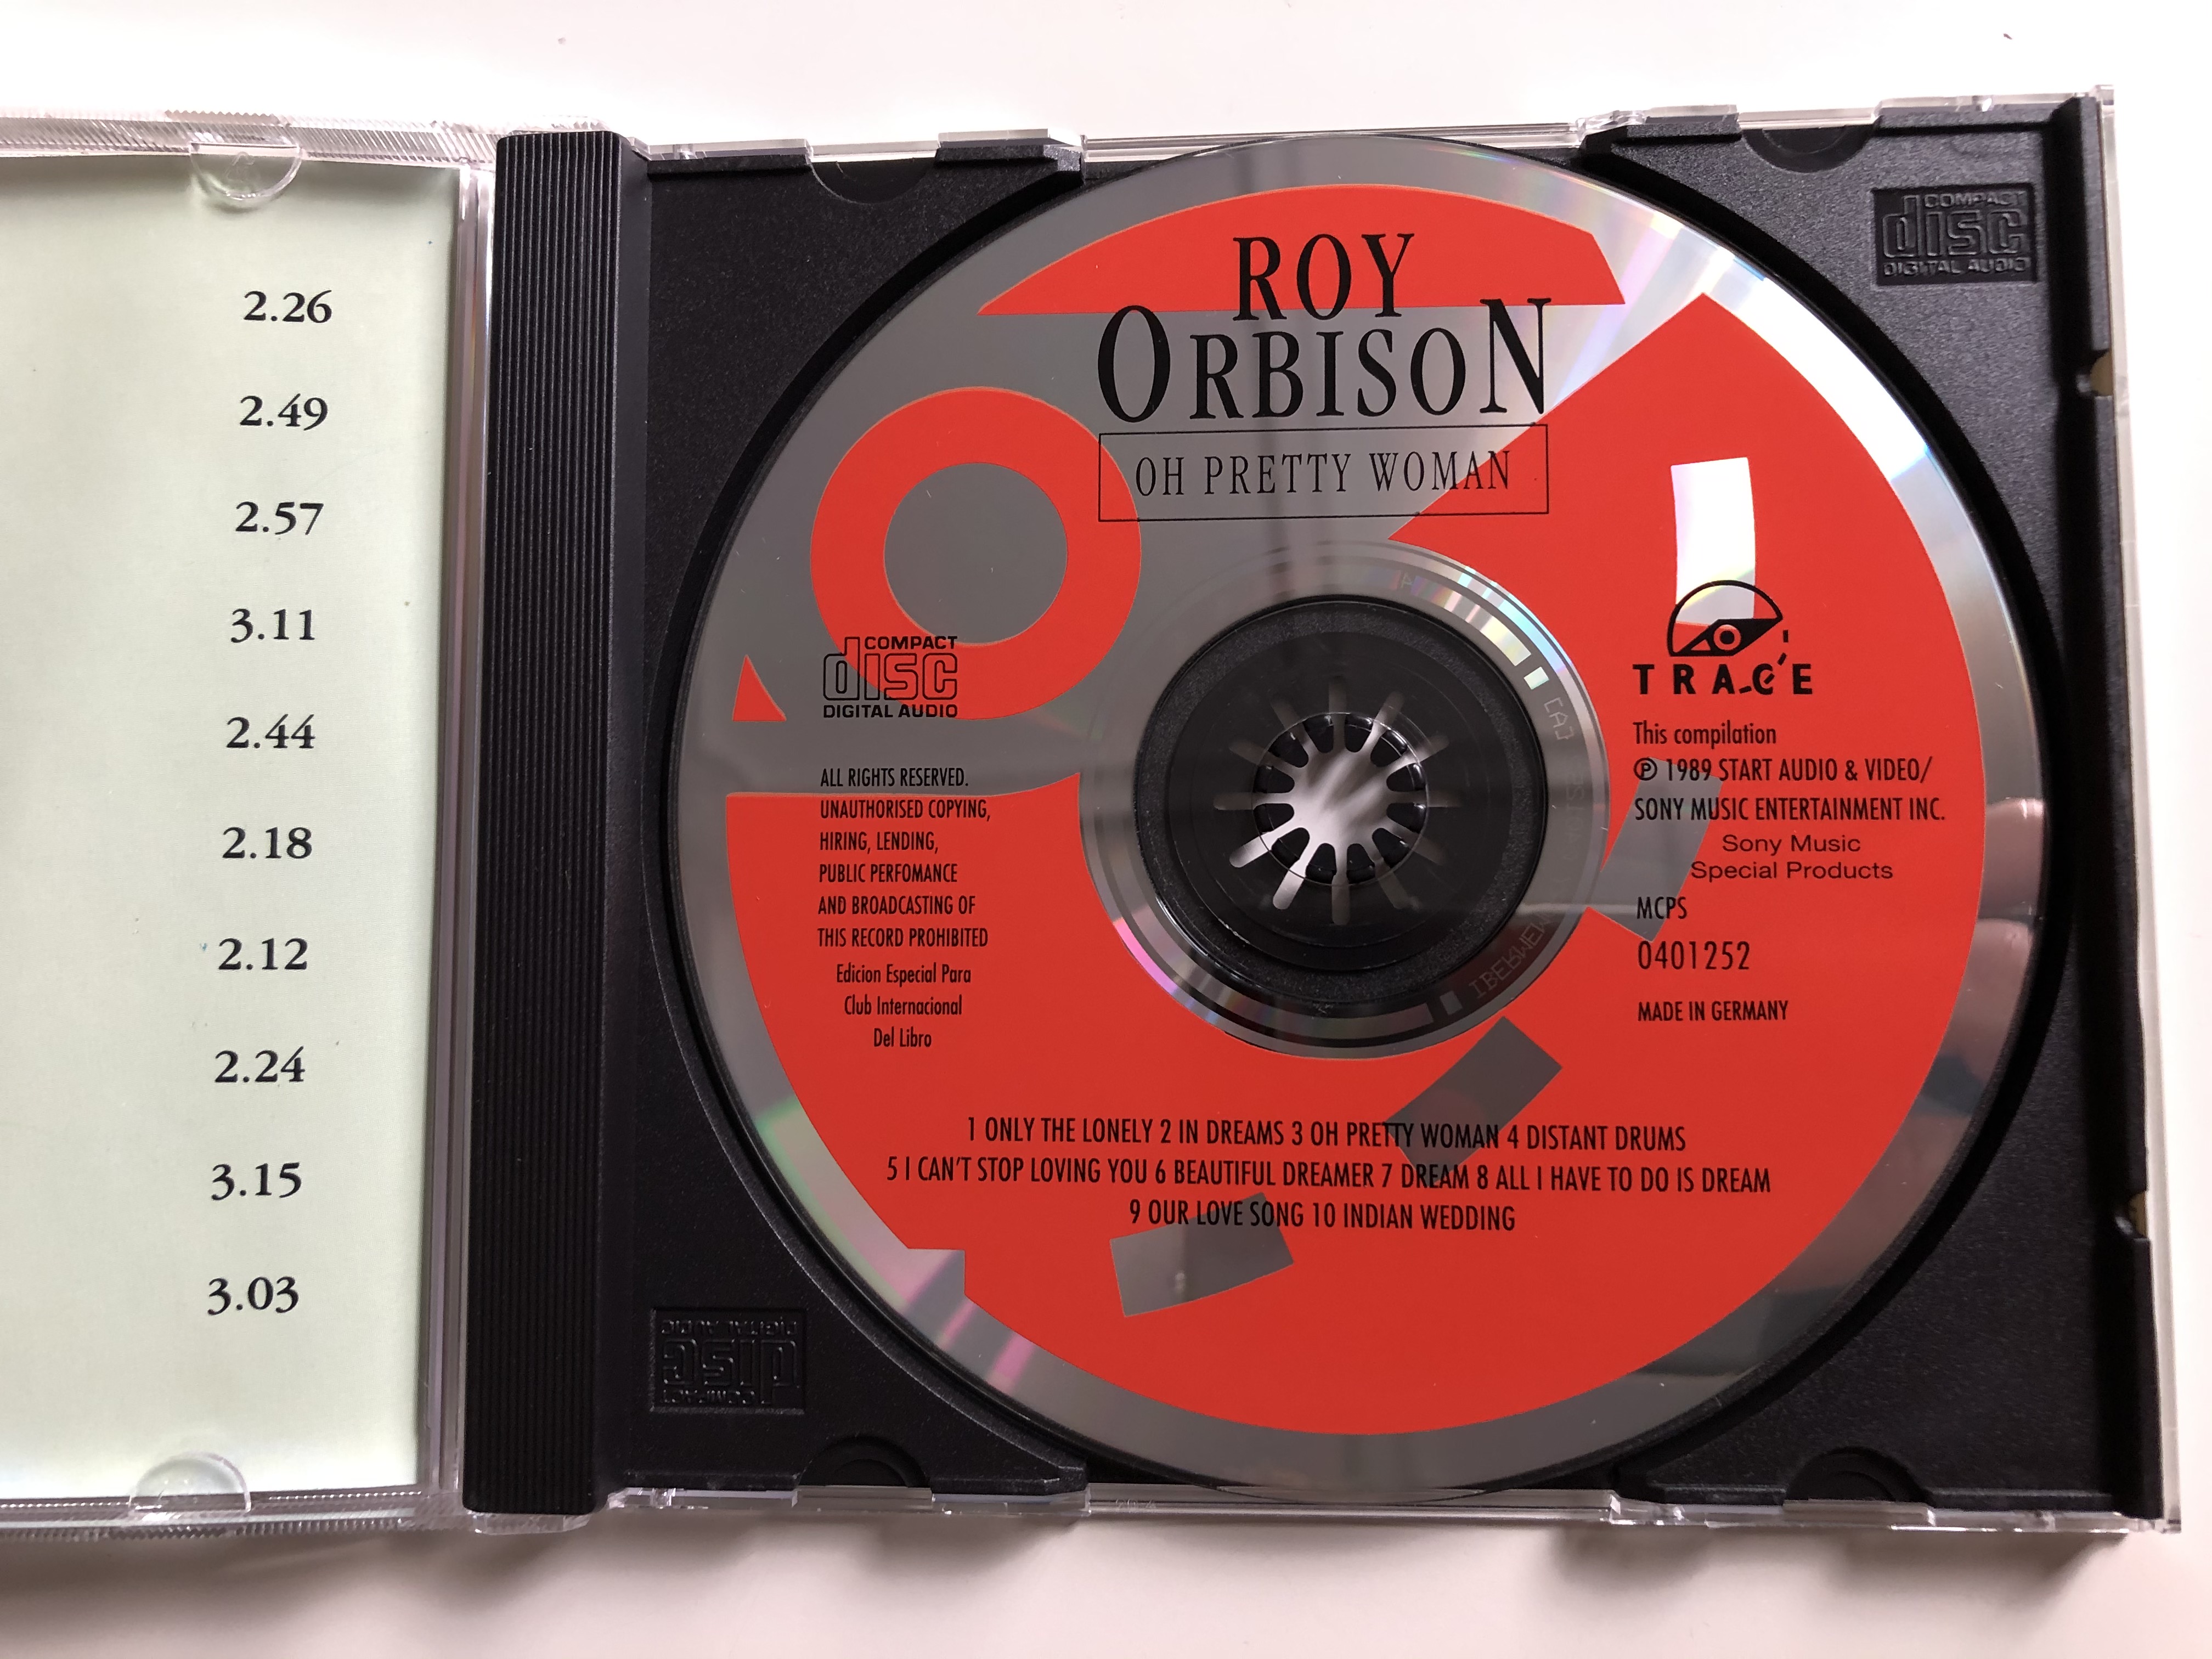 the-world-of-roy-orbison-oh-pretty-woman-including-only-the-lonely-in-dreams-all-i-have-to-do-is-dream-i-can-t-stop-loving-you-trace-trading-audio-cd-1992-0401252-3-.jpg